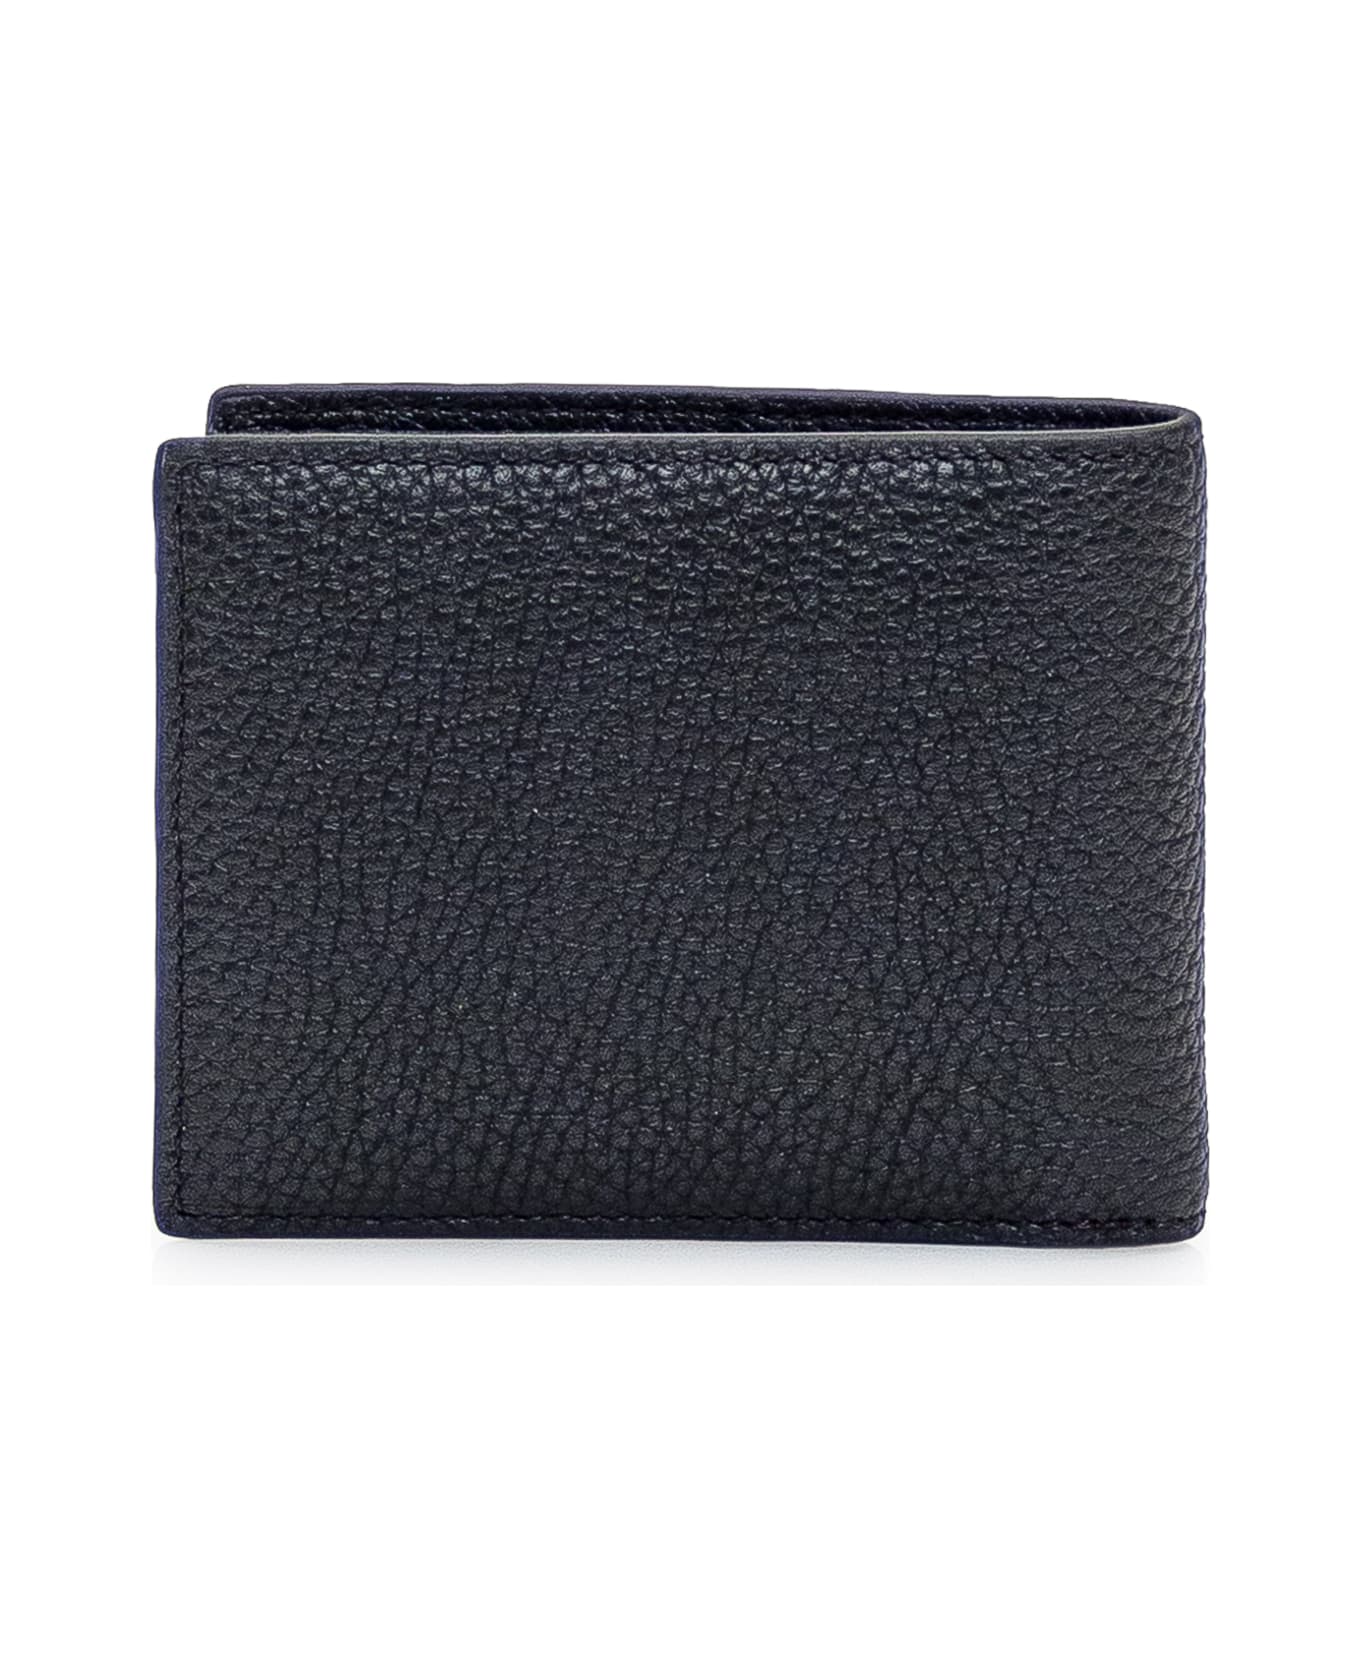 Bally Leather Wallet - BLACK/BALLYRED+PALL